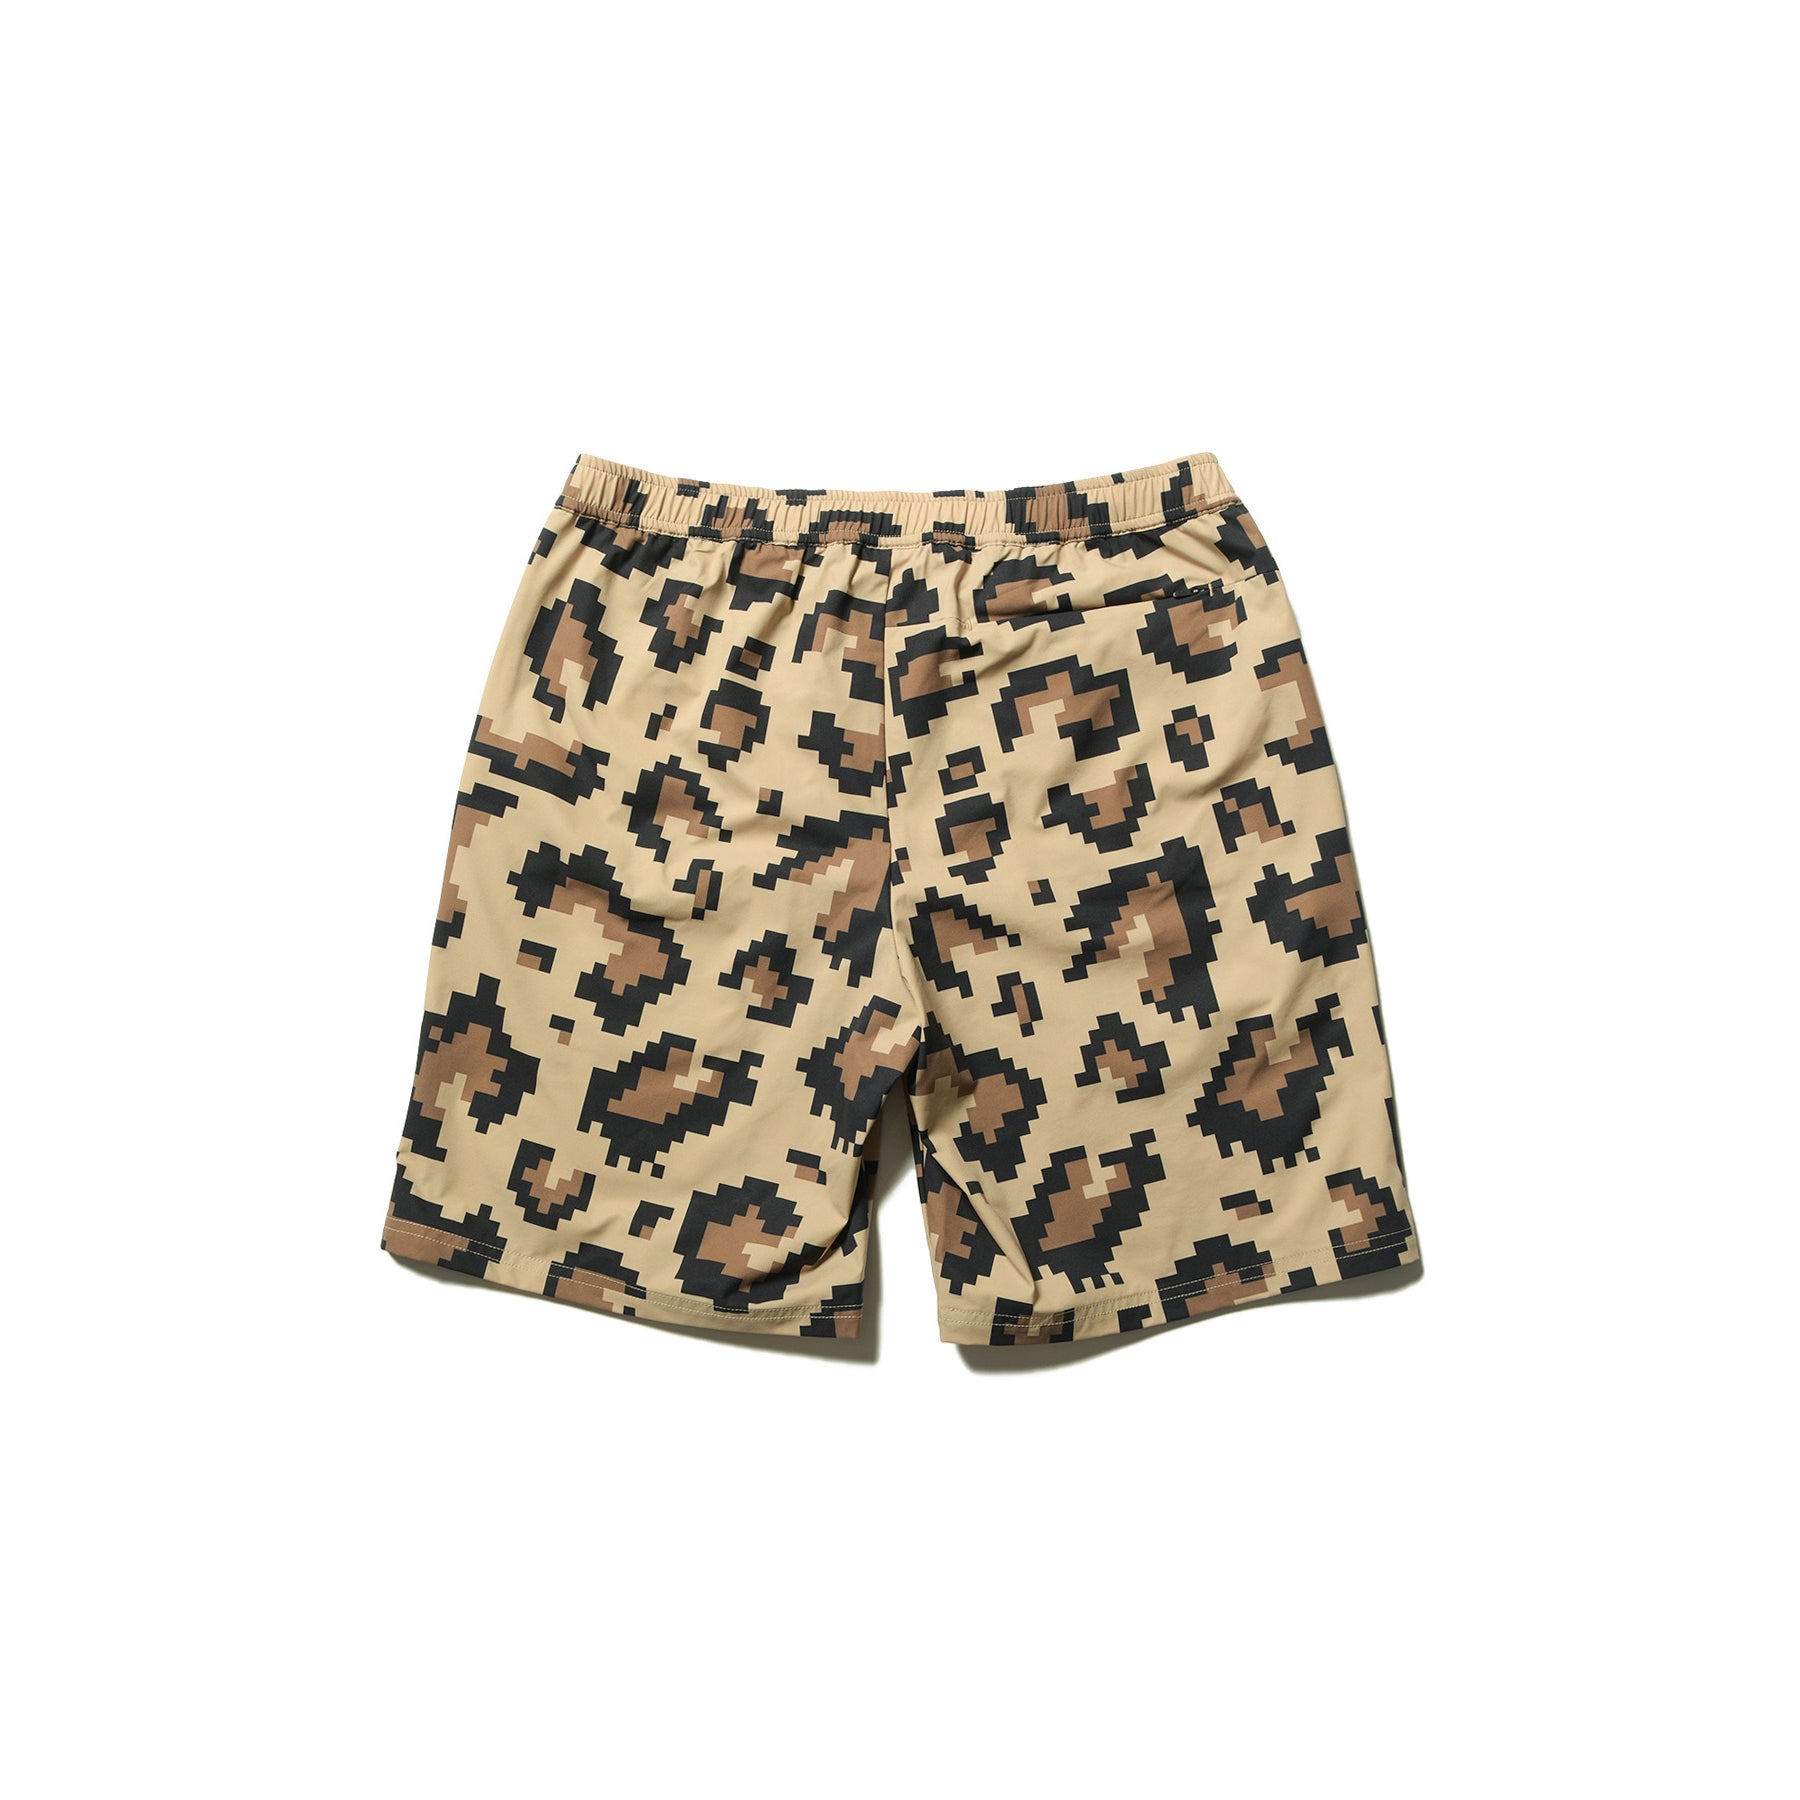 FCRB PRACTICE SHORTS / LEOPARD-